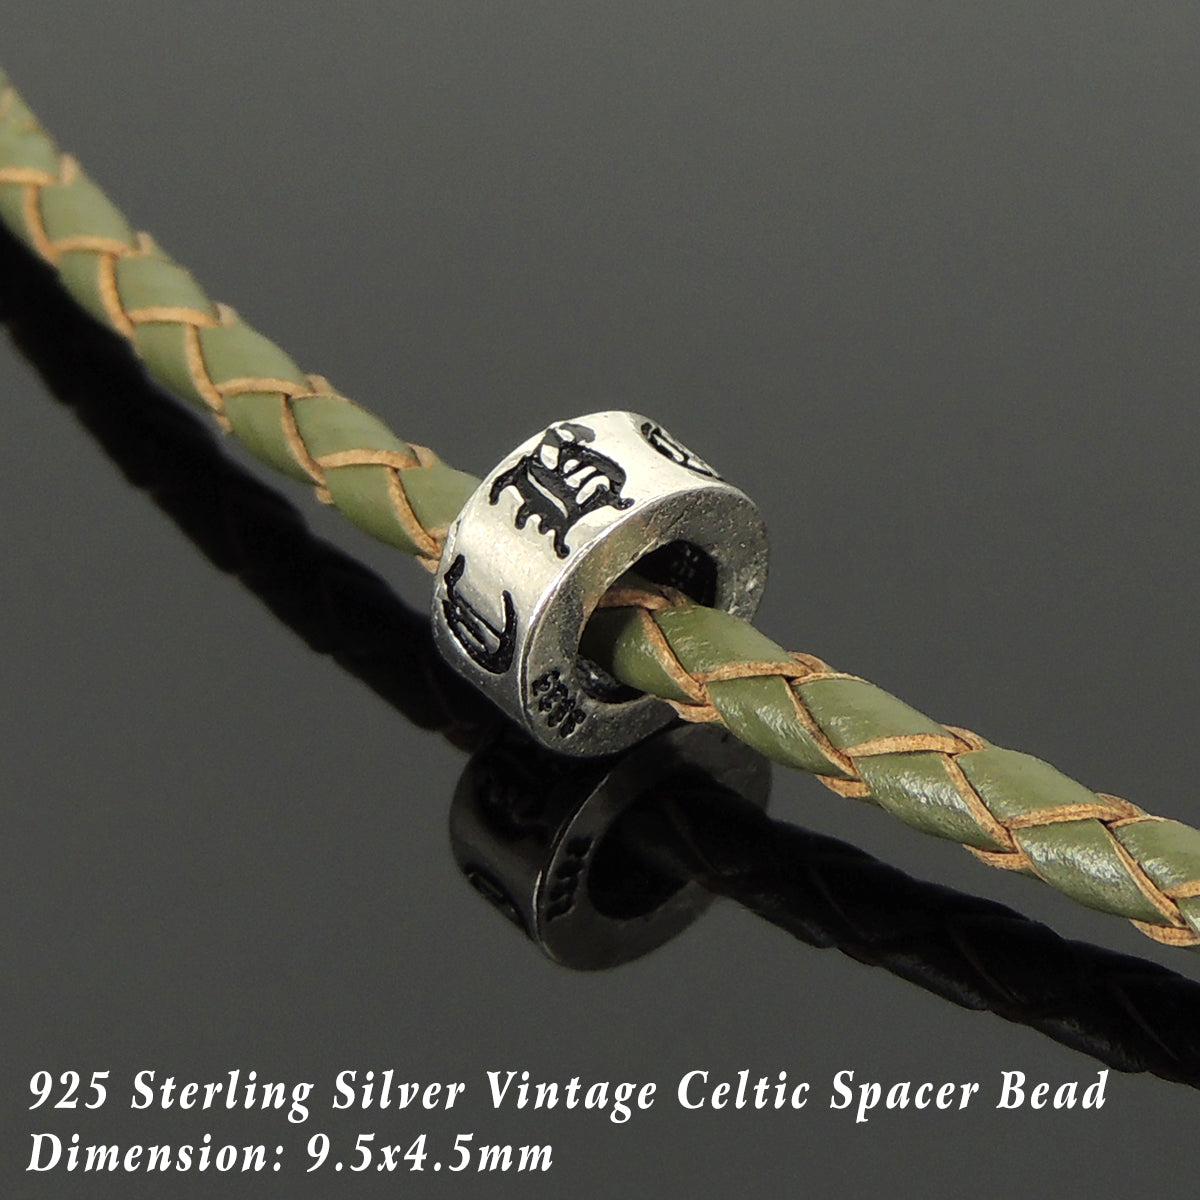 Handmade Vintage Celtic Choker Necklace - Authentic Olive Green Leather for Men's Women's Casual Style with Sterling Silver 925 (non-plated) Parts NK220